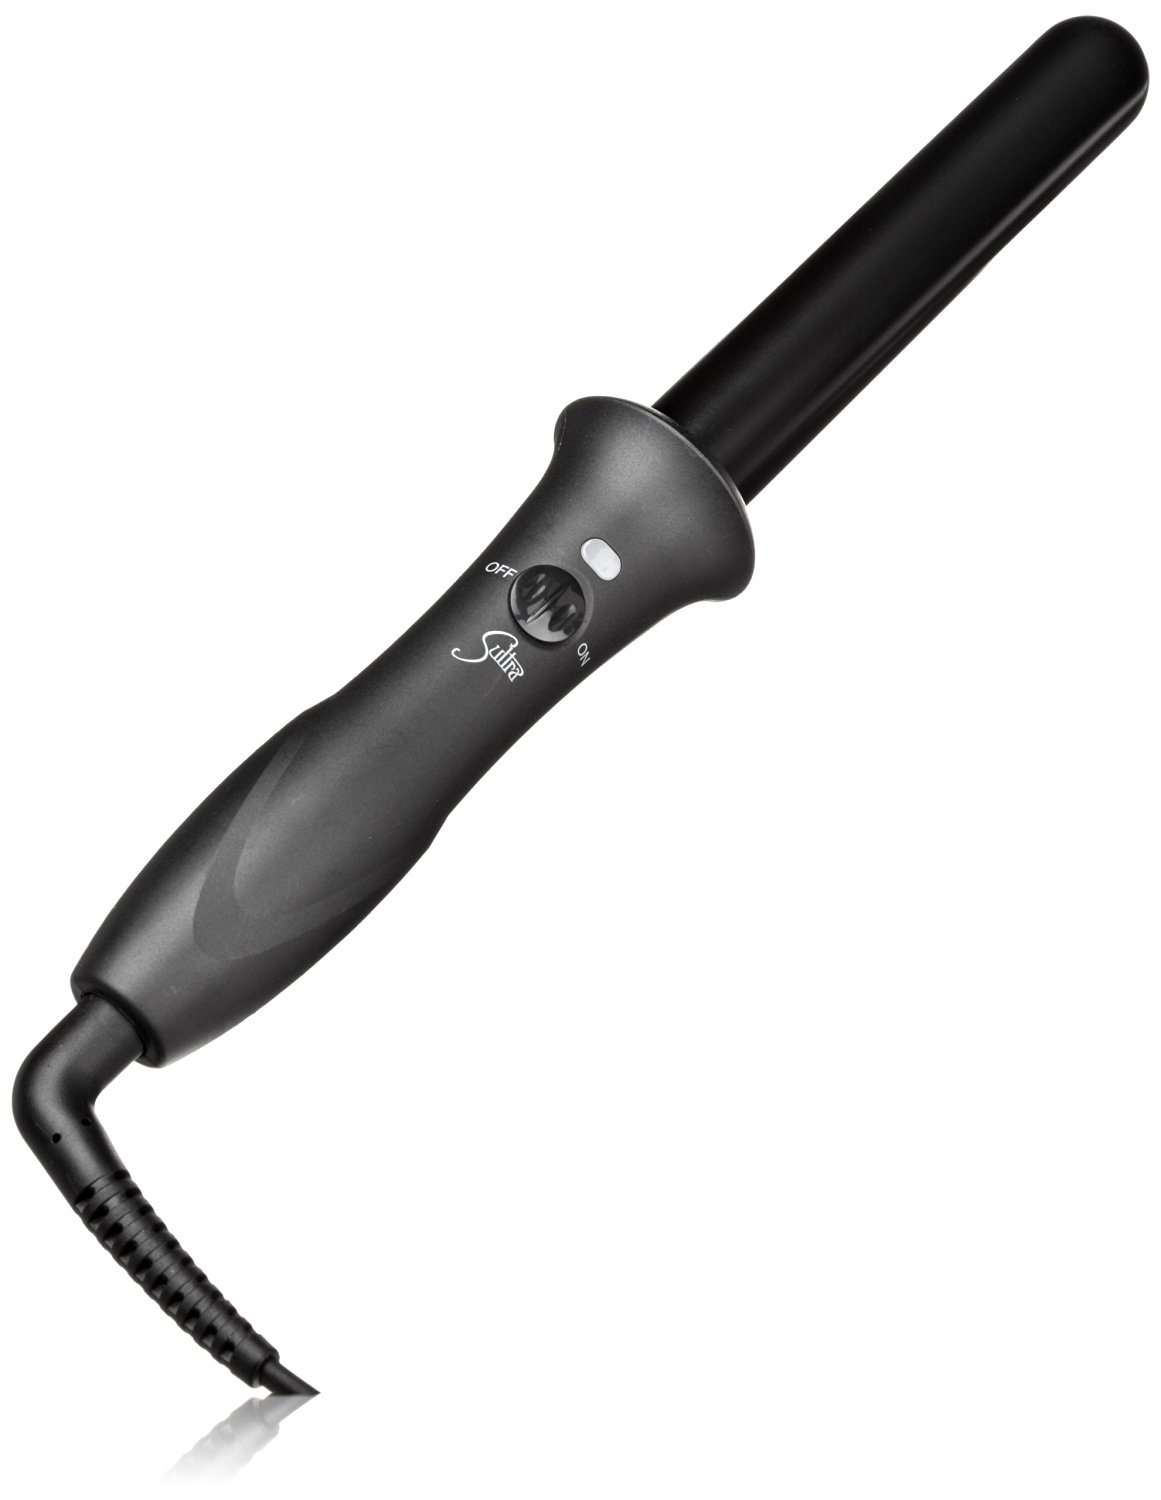 Sultra curling iron